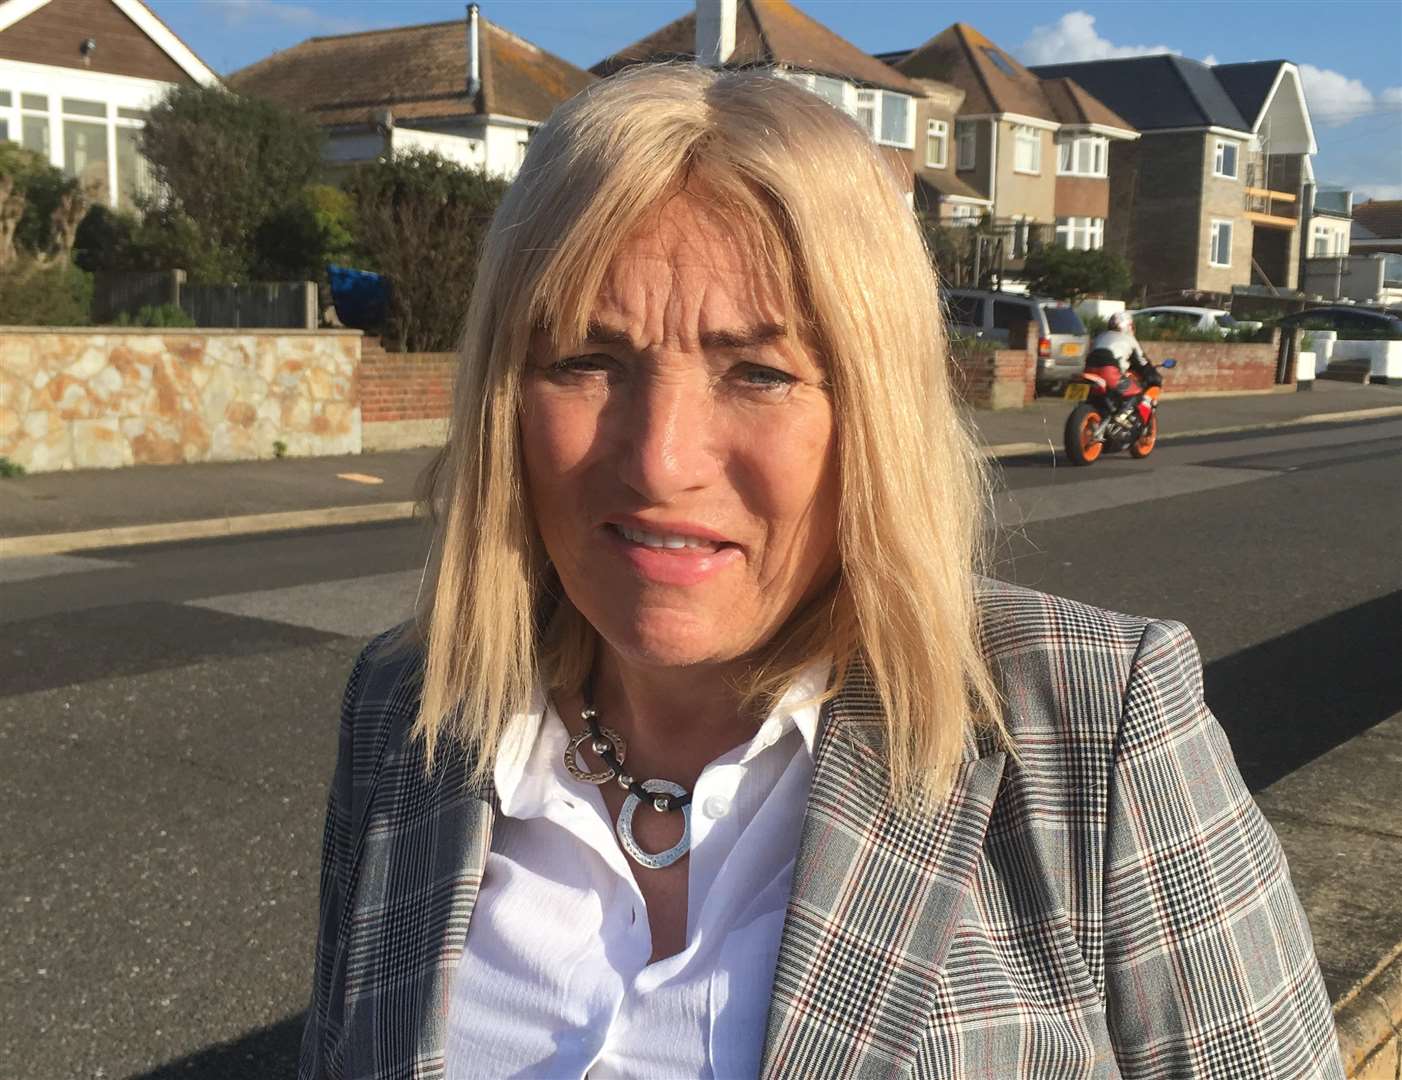 Kellie Maloney divides her time between hoems in Herne Bay and Portugal